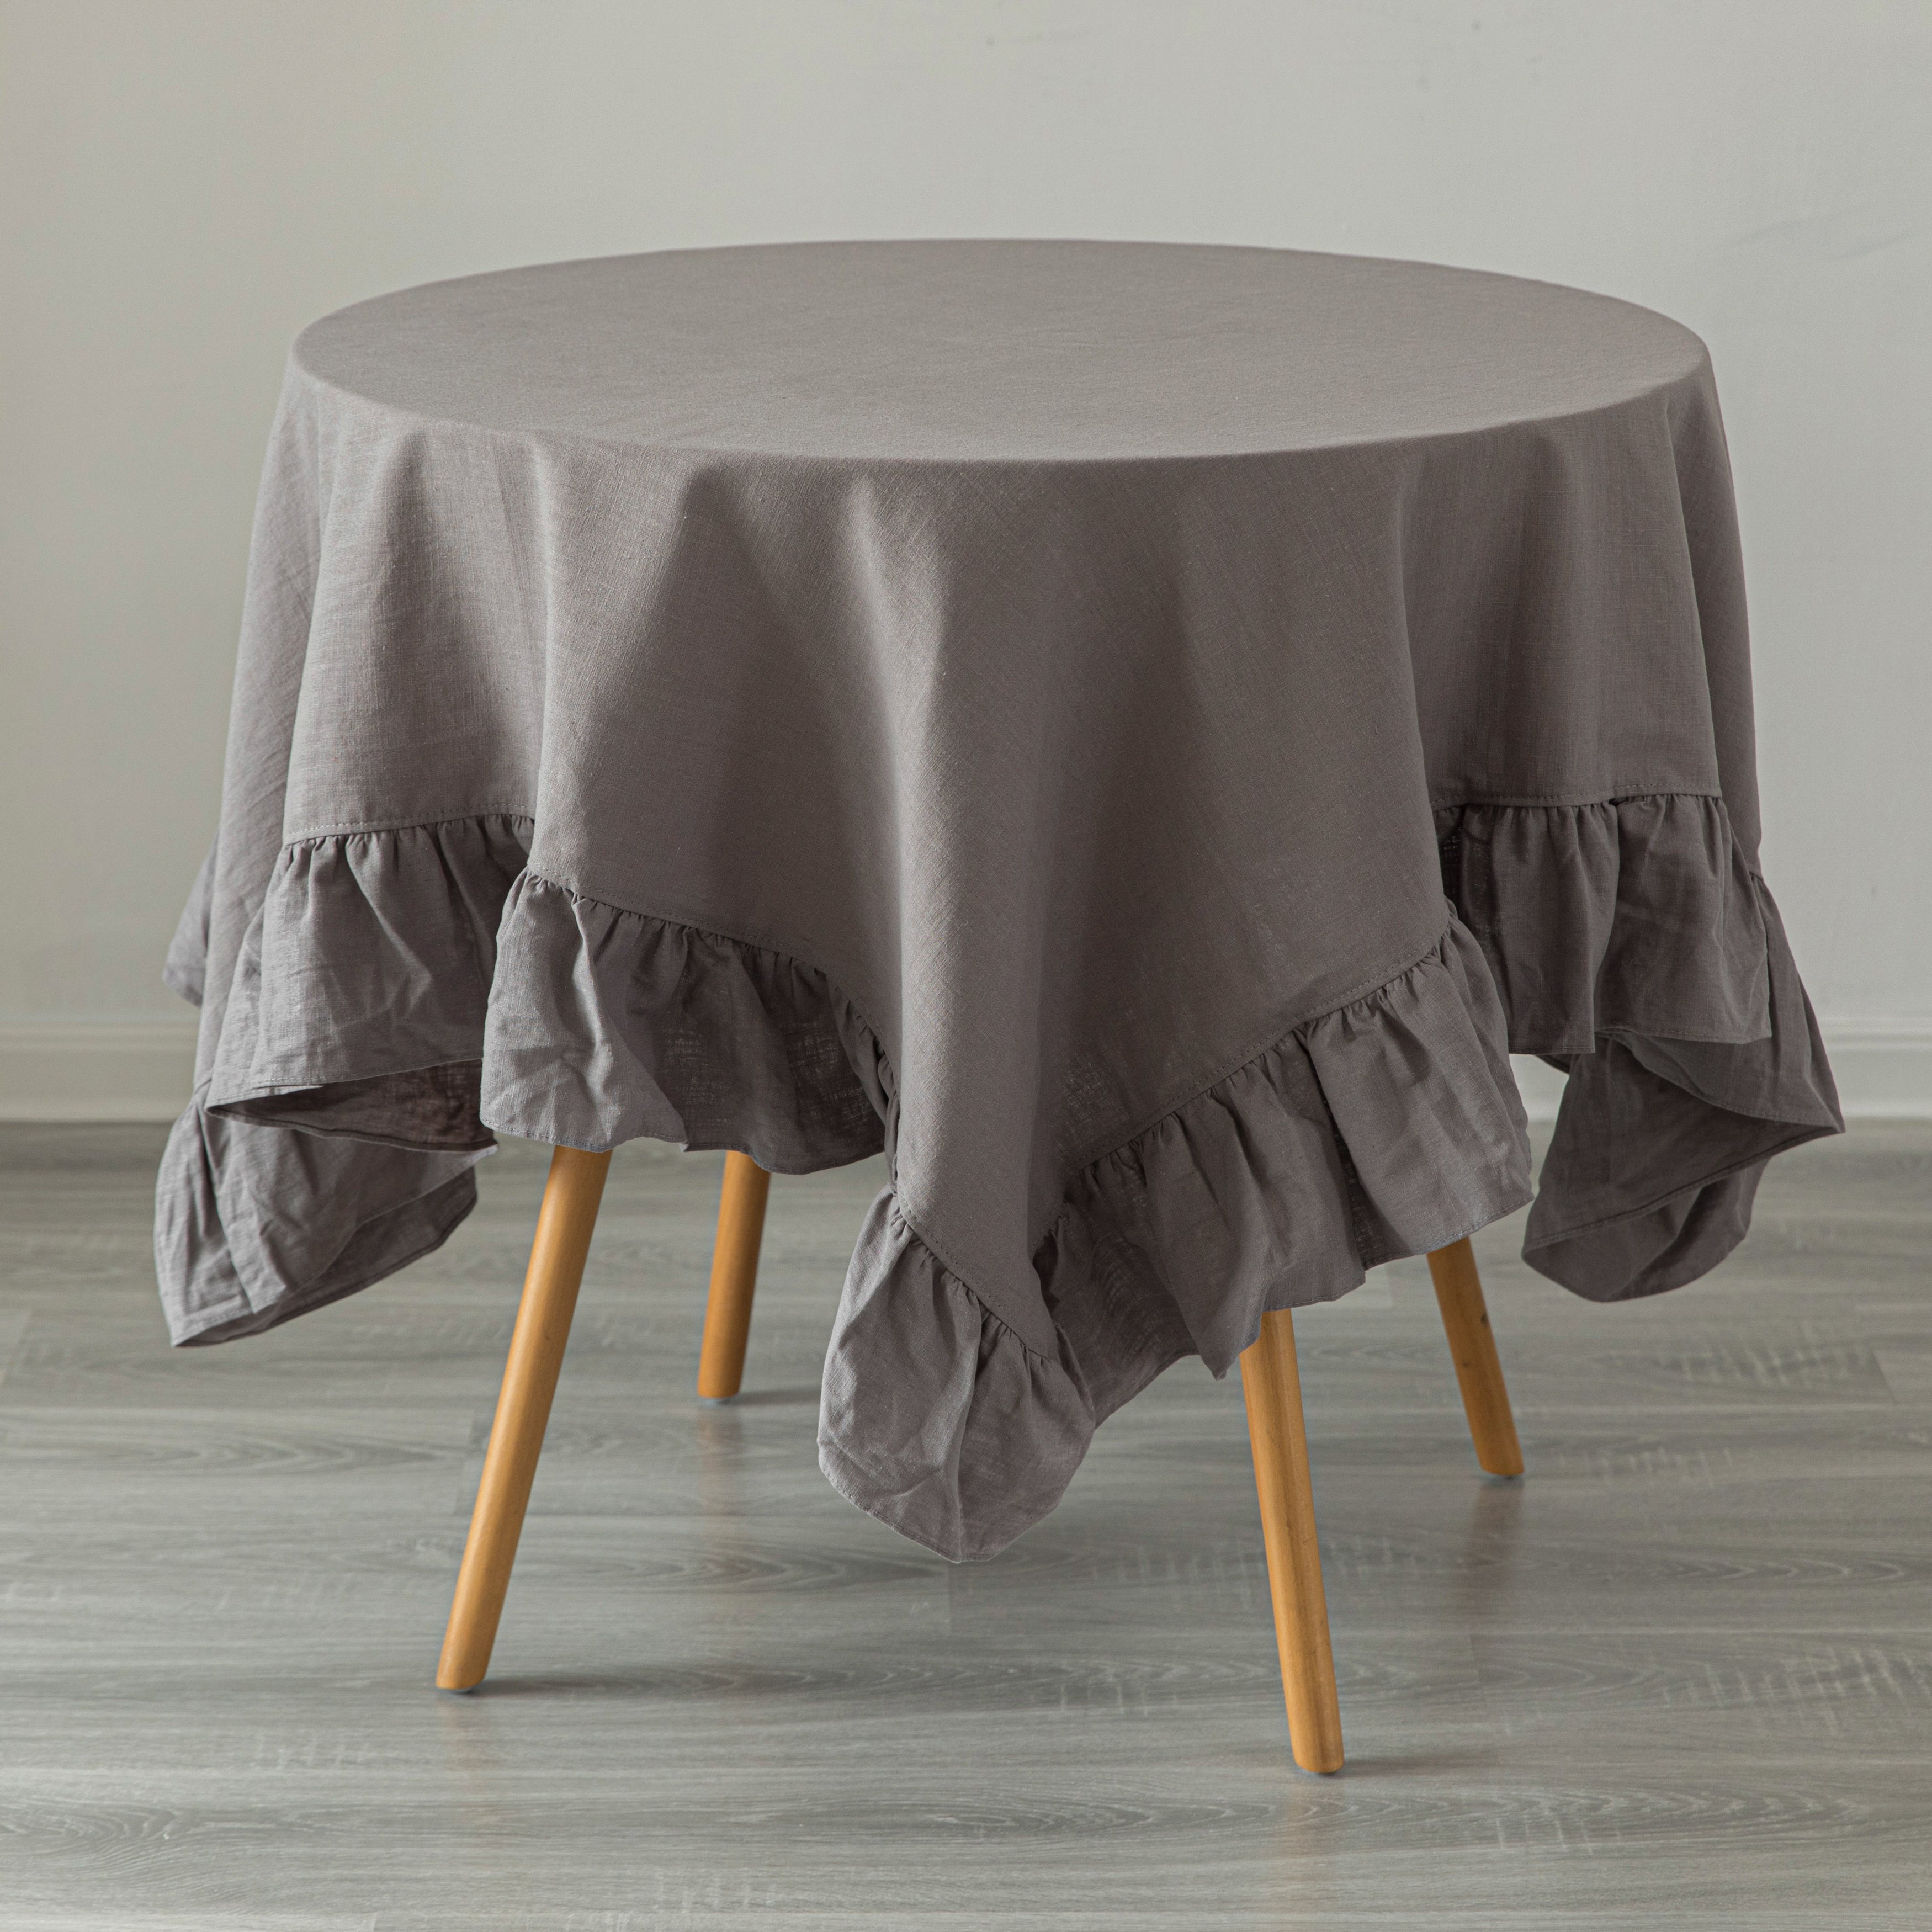 Deerlux 100 Percent Pure Linen Washable Tablecloth With Ruffle Trim - 52 X 70 In. Gray